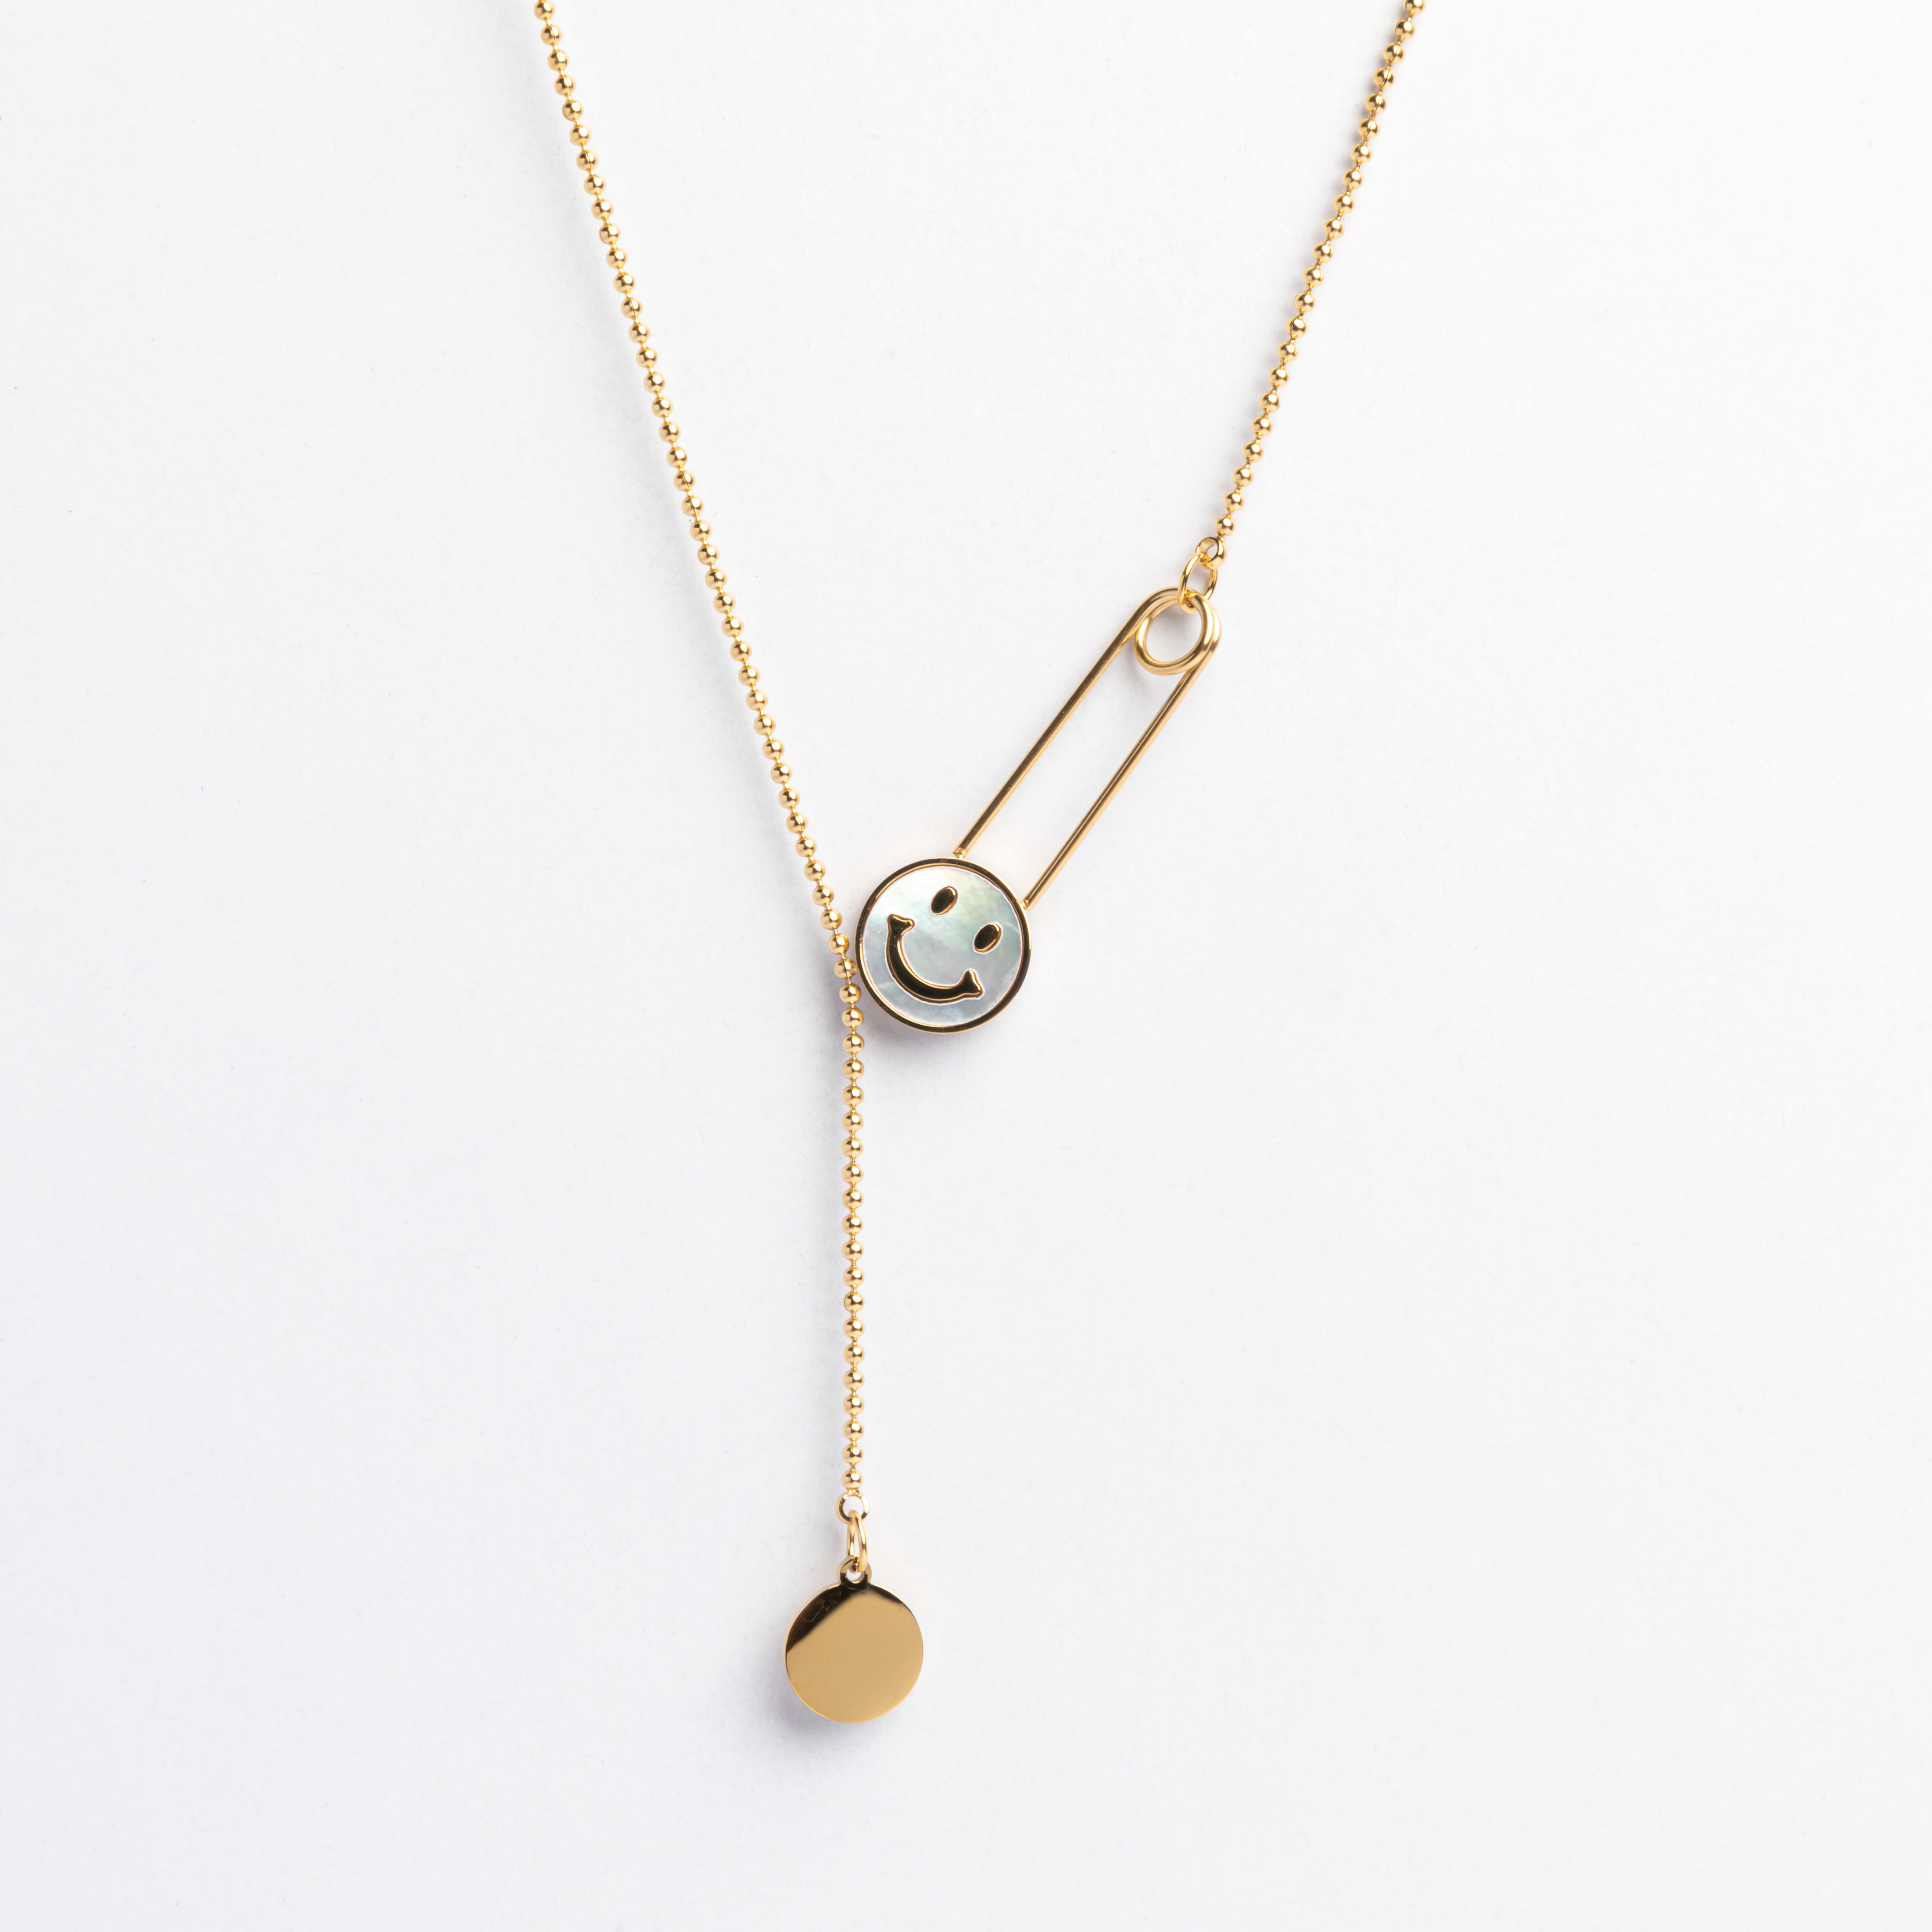 Gold Smiley Pin Chain